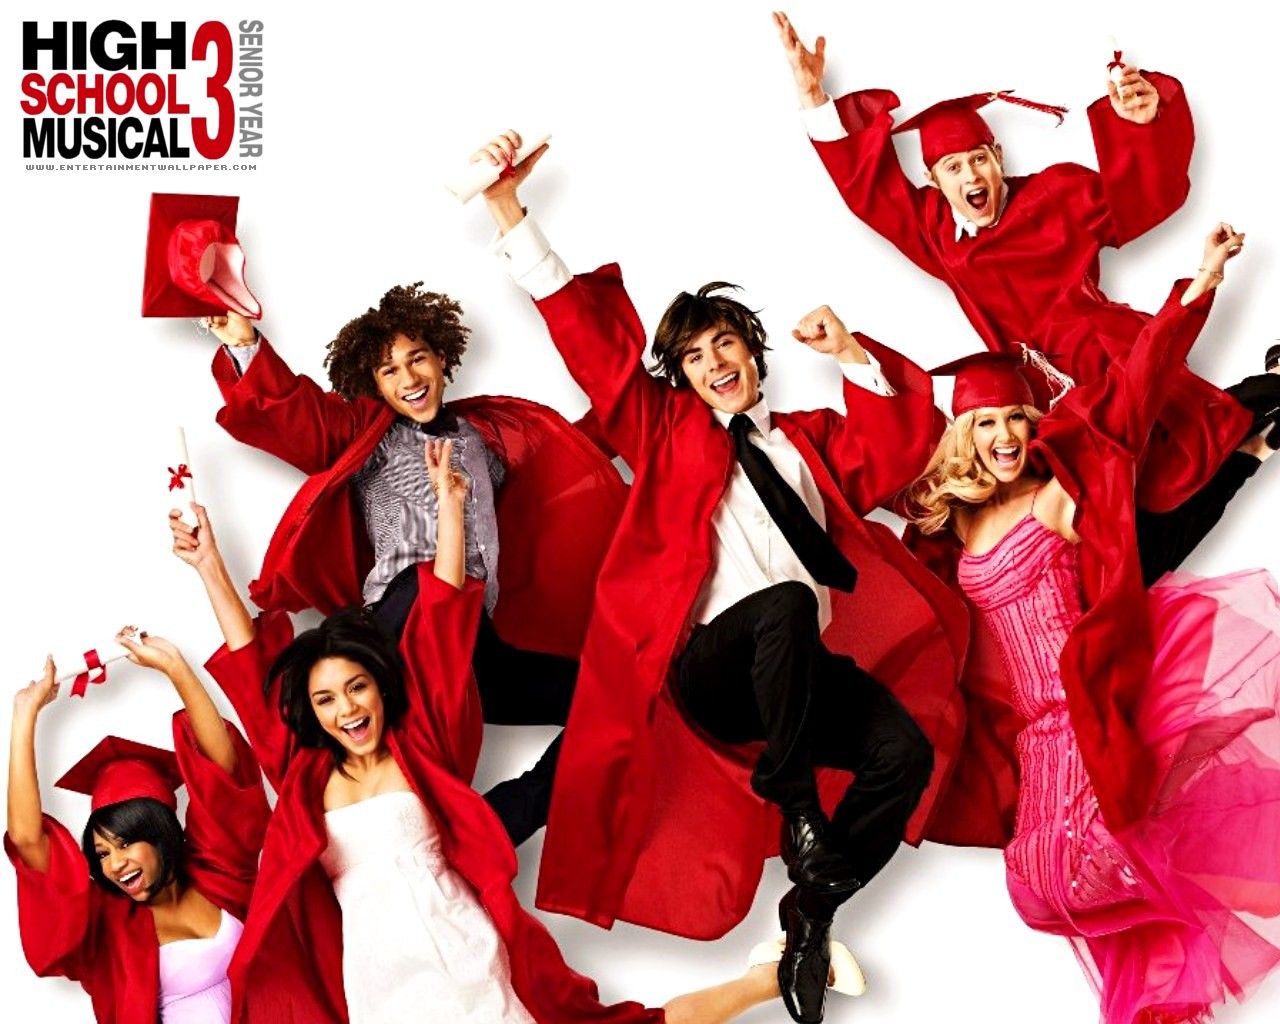 Another year over, a new one just begun: High school musical 3